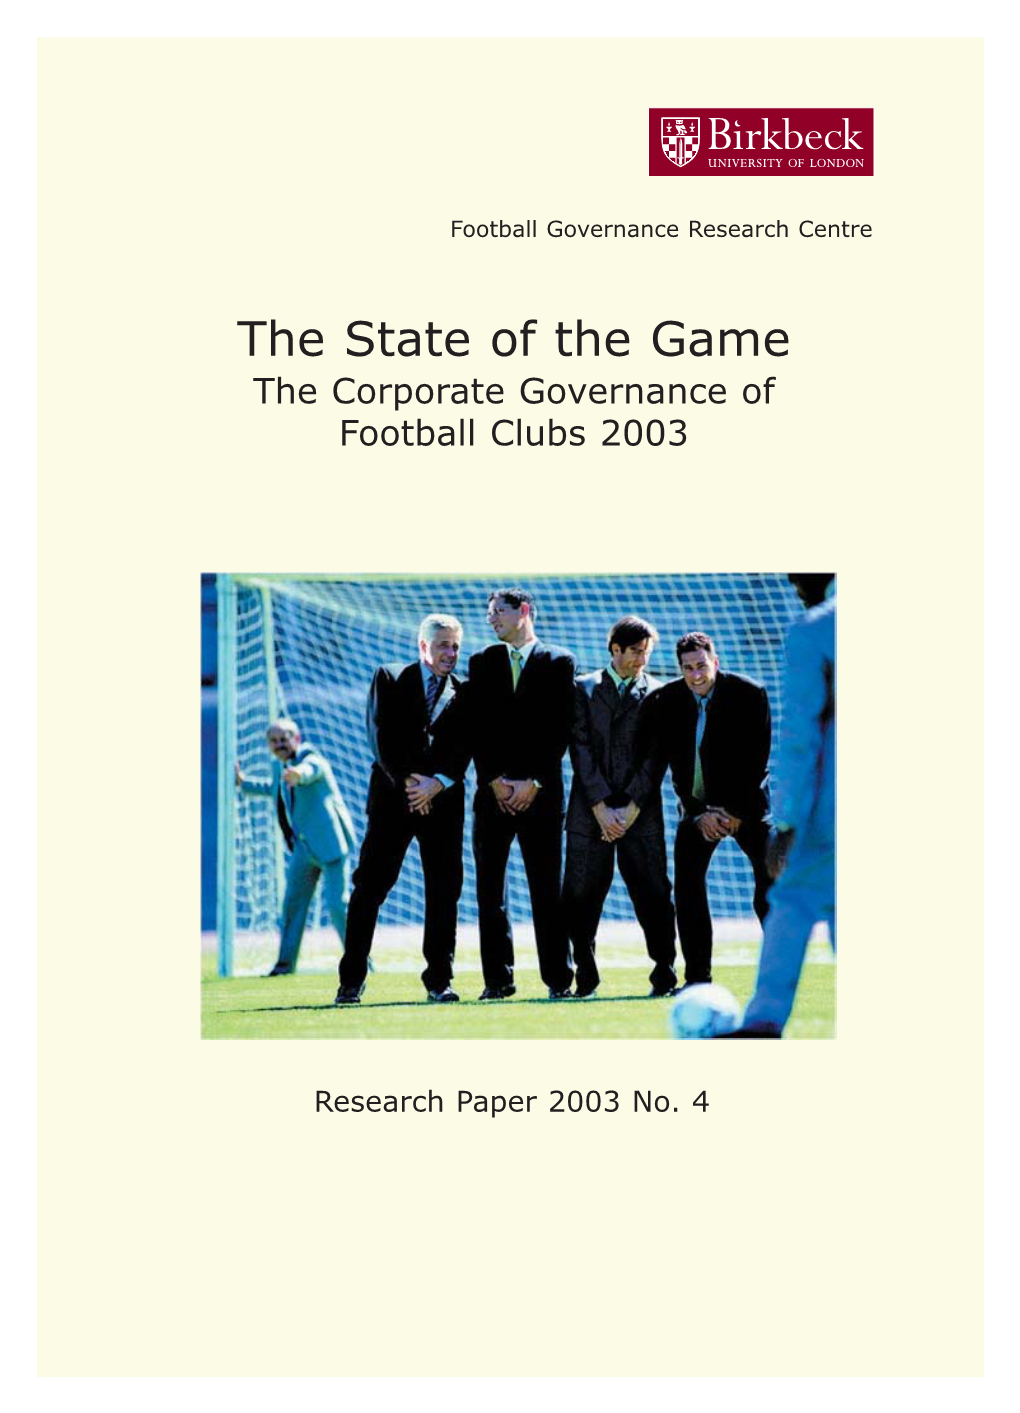 The State of the Game: the Corporate Governance of Football Clubs 2004